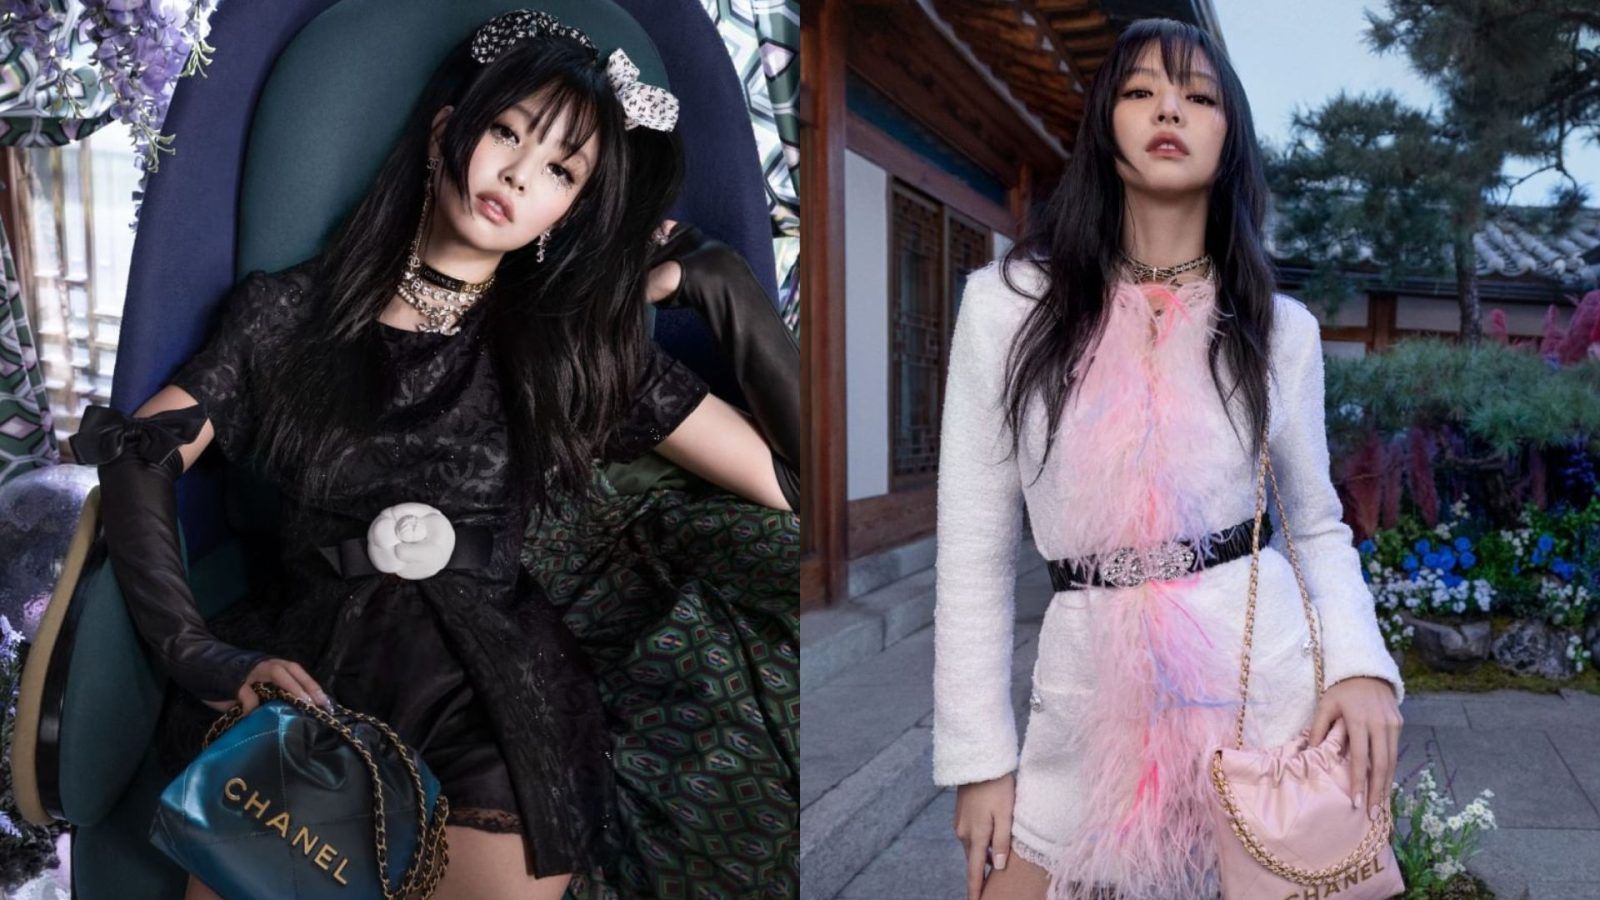 BLACKPINK's Jennie is the new face of the Chanel 22 bag. Bringing